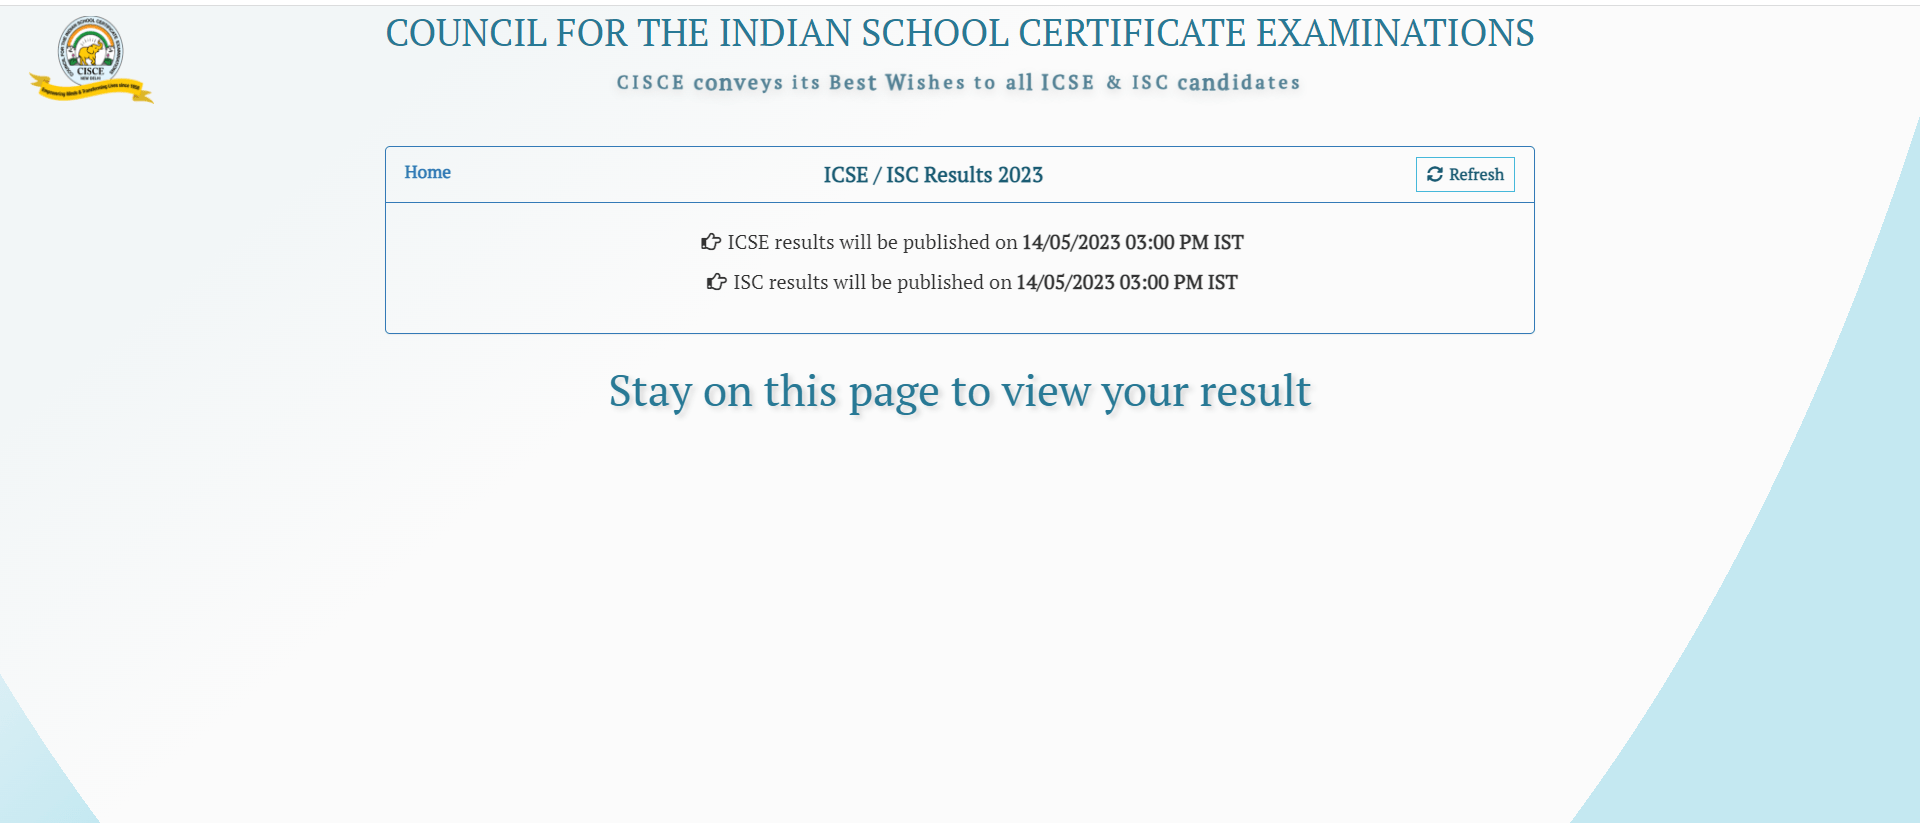 isc 12th result 2023, cisce.org, result.cisce.org 2023 isc.org, result cisce .org, cisce. org login ,cisce.org class 12 result, results.cisce.org 2023, isc result 2023 latest news